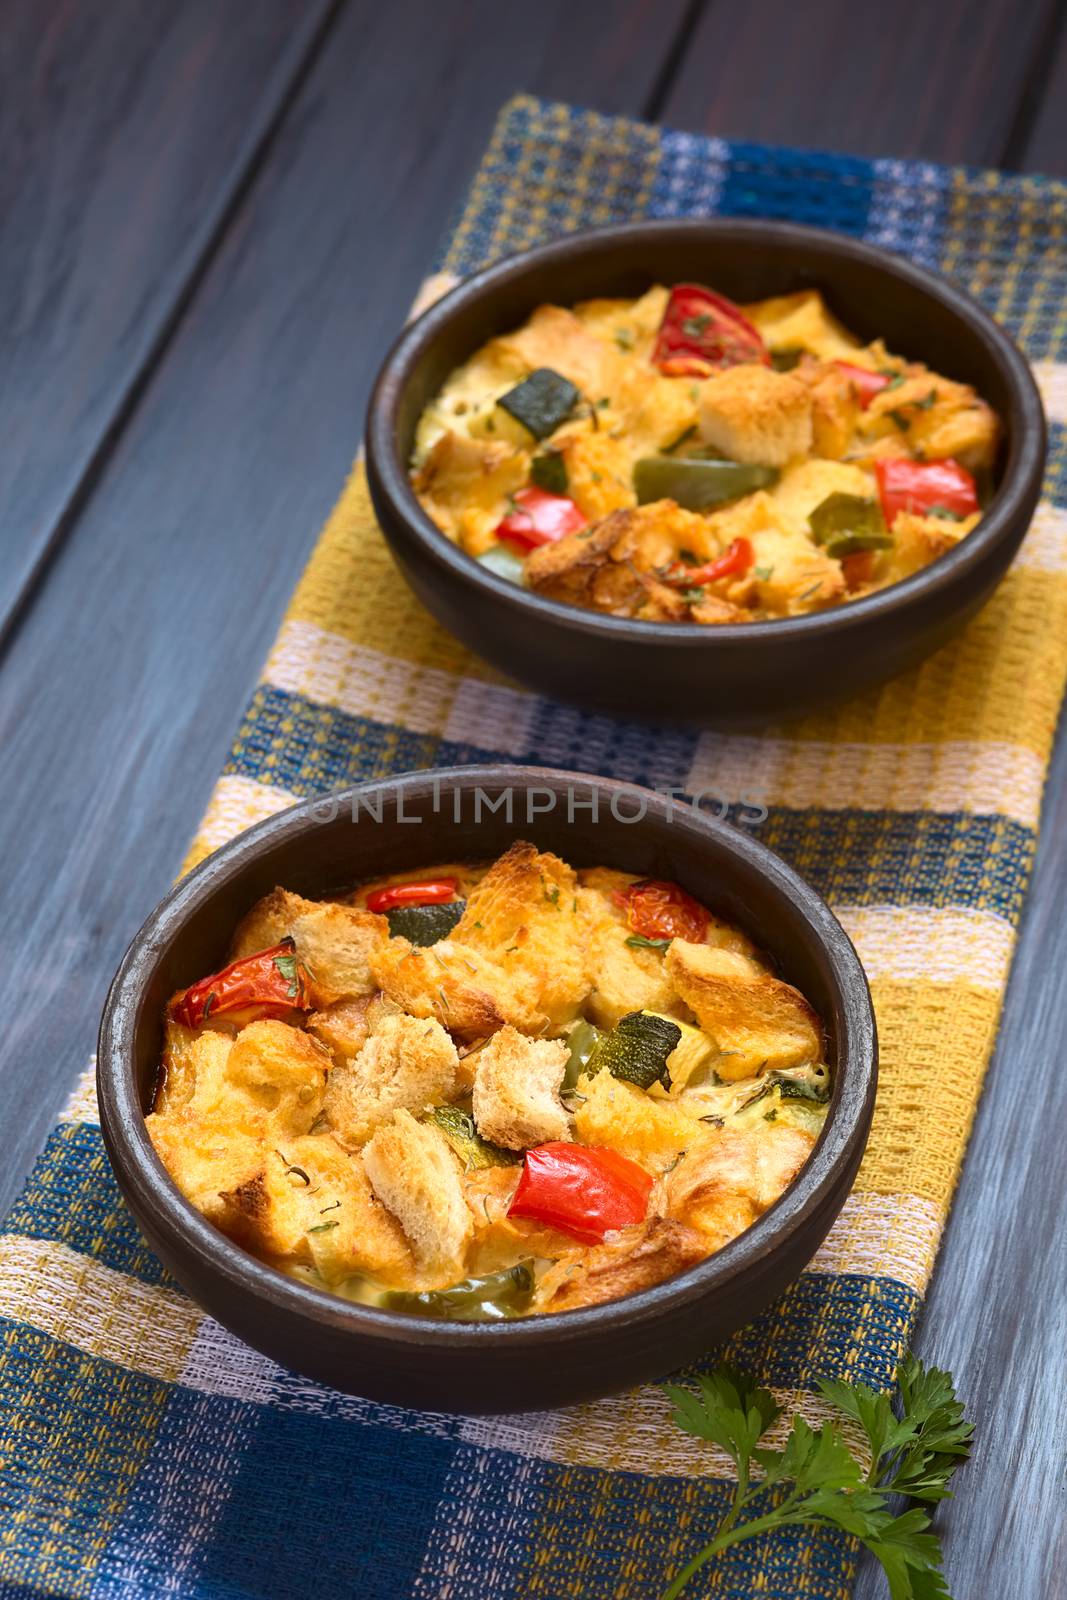 Savory baked vegetarian bread pudding made of zucchini, bell pepper, tomato and diced baguette, seasoned with thyme and parsley in rustic bowl on kitchen towel, photographed on dark wood with natural light (Selective Focus, Focus in the middle of the first dish)